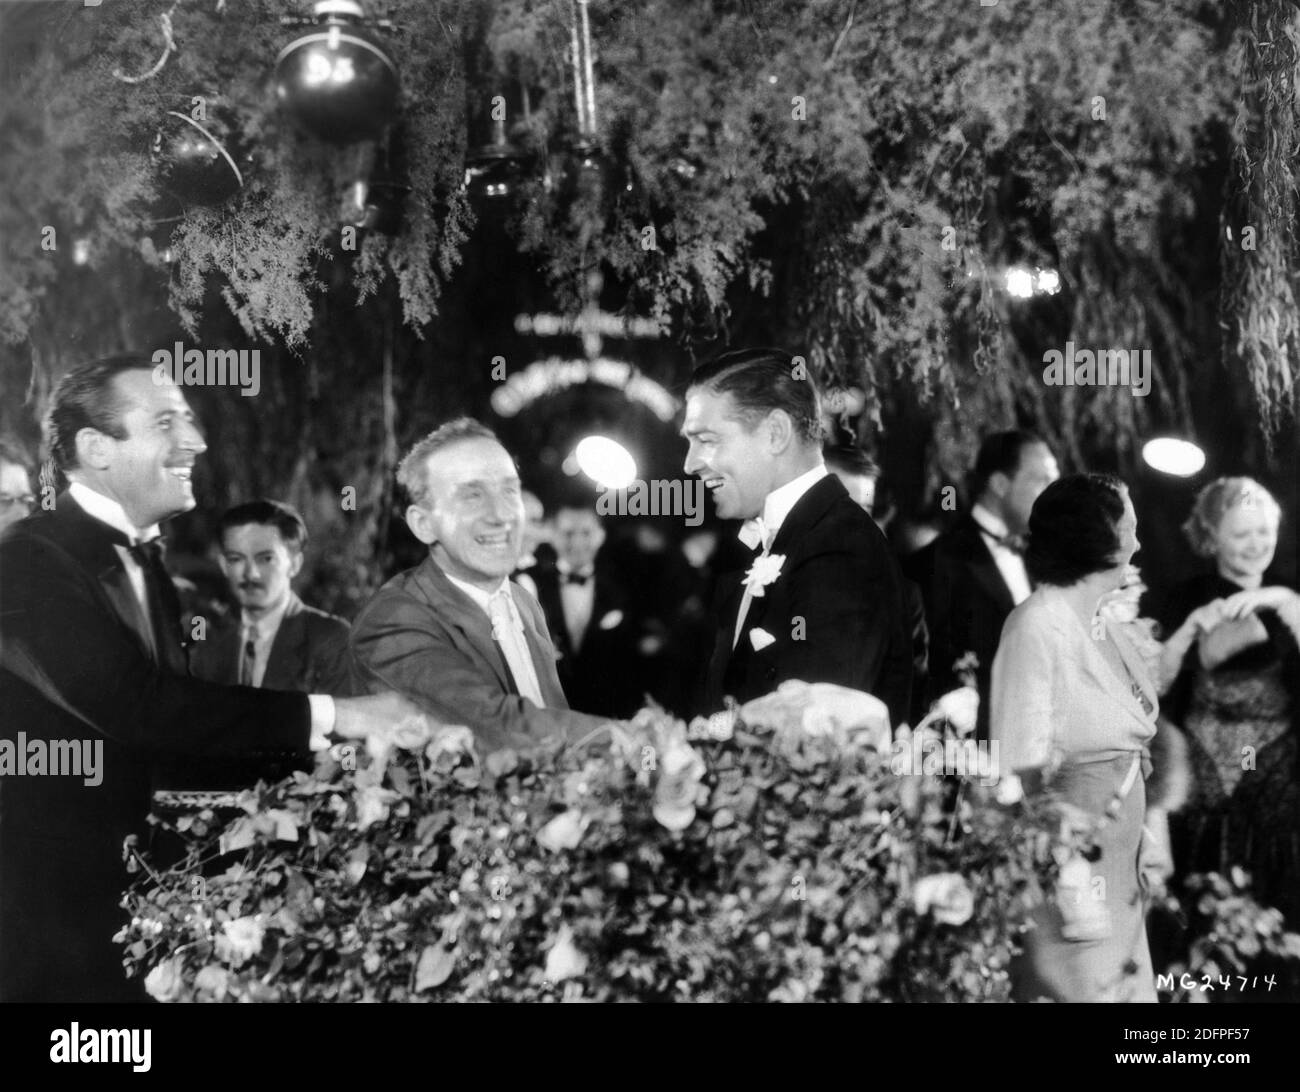 CLARK GABLE welcomed by Masters of Ceremonies JOHN MILJAN and JIMMY DURANTE at the Hollywood Premiere at Grauman's Chinese Theatre in Los Angeles on July 15th 1932 of his latest film STRANGE INTERLUDE 1932 director ROBERT Z. LEONARD from the play by Eugene O'Neill Metro Goldwyn Mayer Stock Photo